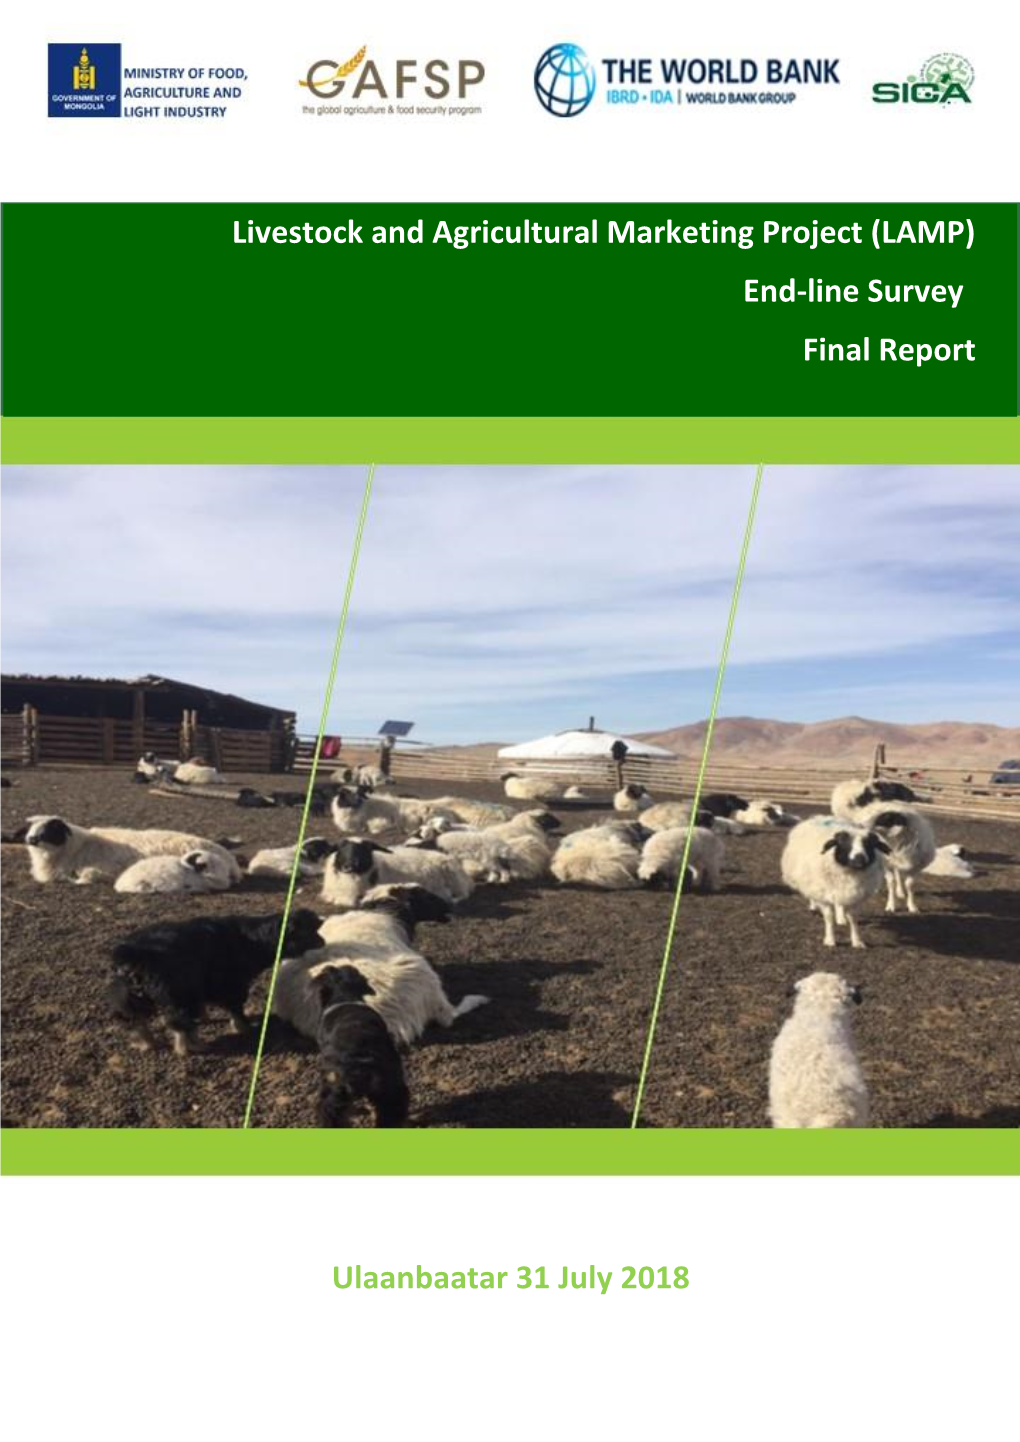 Ulaanbaatar 31 July 2018 Livestock and Agricultural Marketing Project